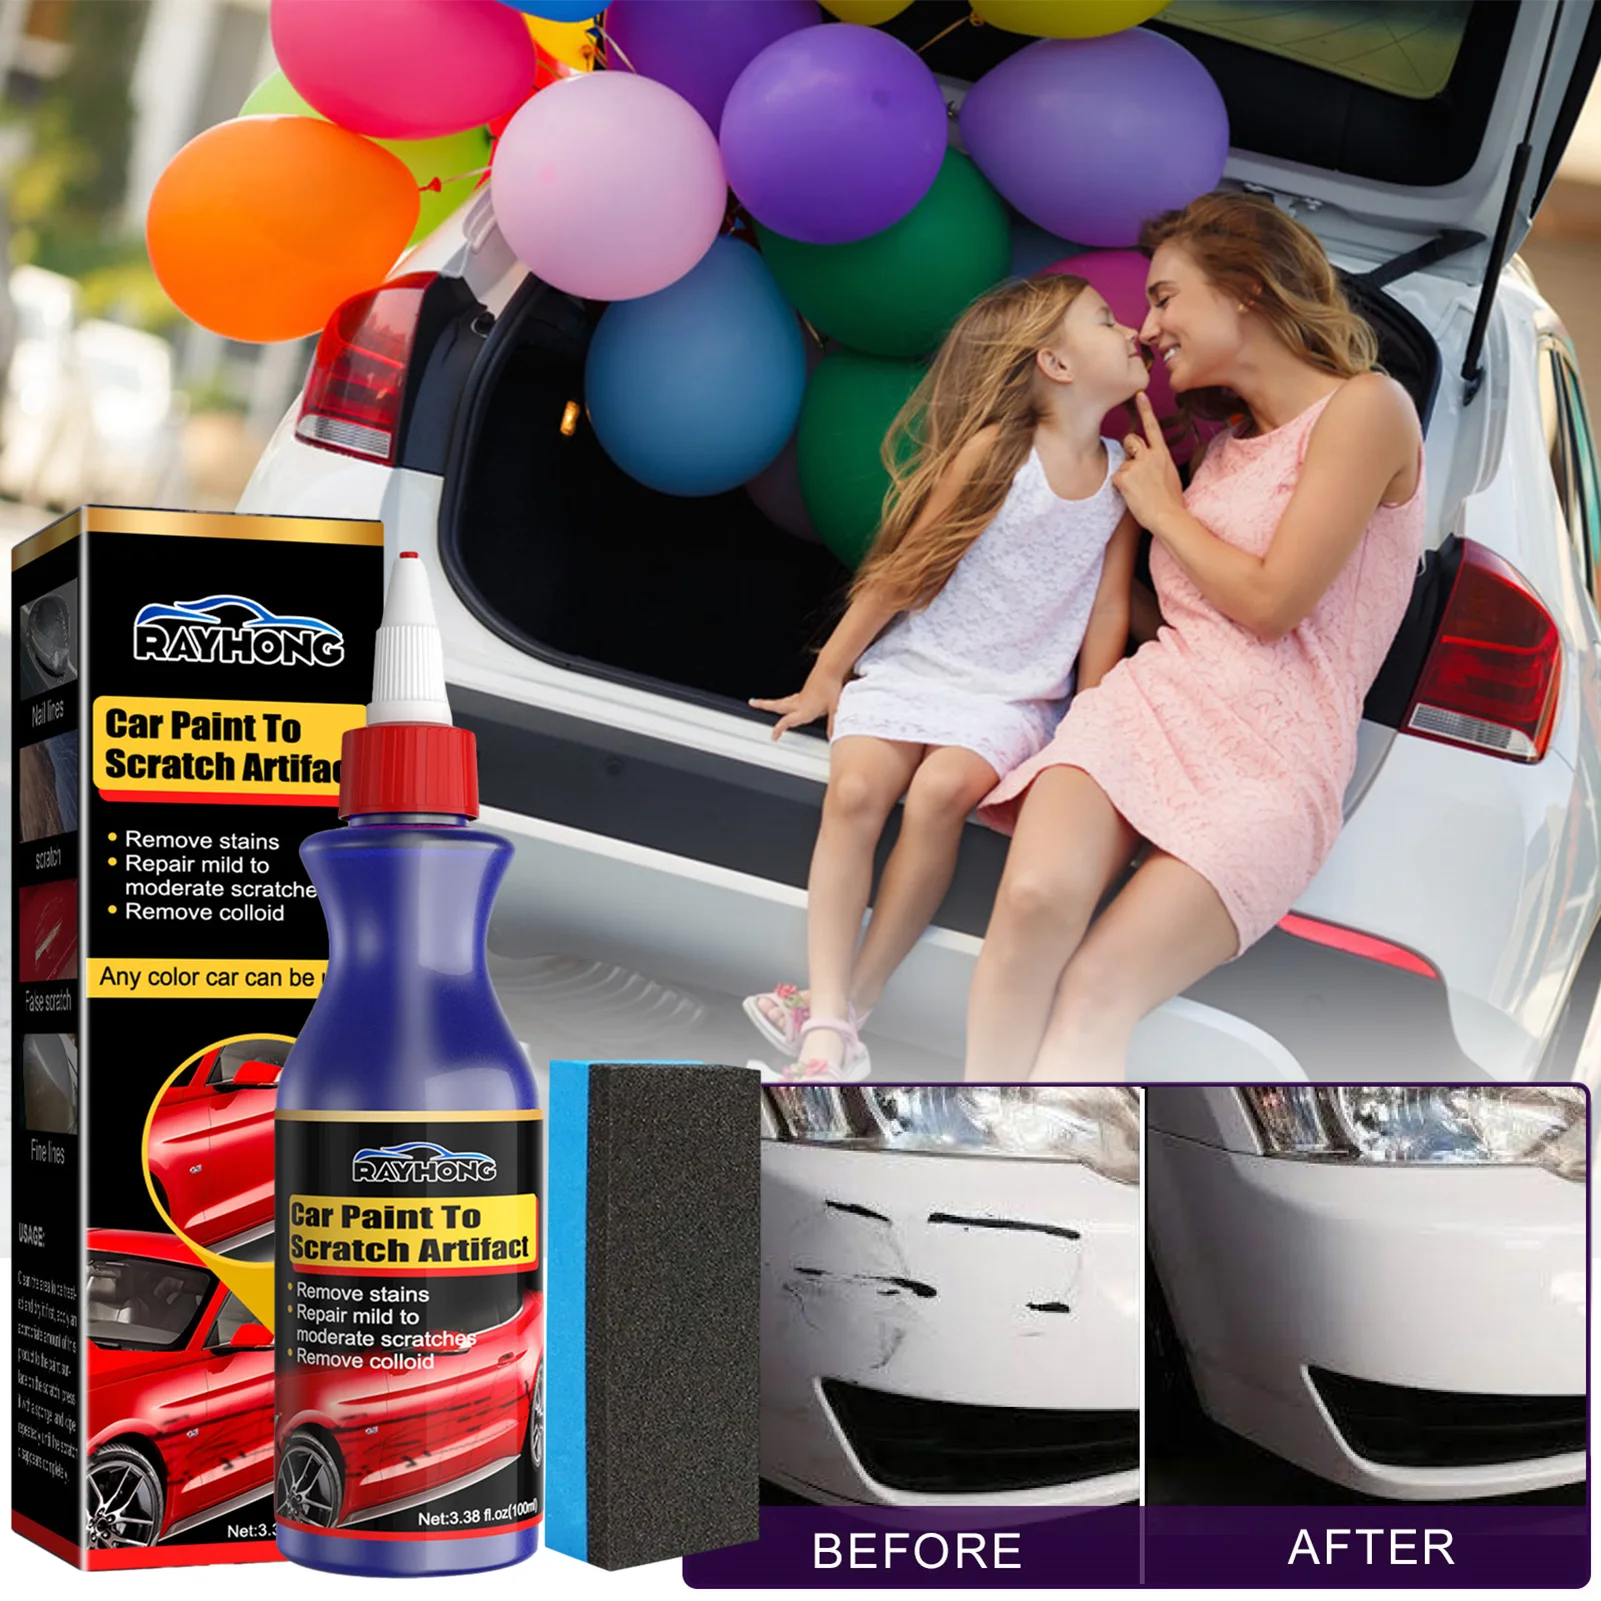 https://ae01.alicdn.com/kf/S95d885d08f86409e931221c83813baa09/Car-Scratch-Remover-Car-Paint-Restorer-And-Decontamination-Clean-Car-Detailing-Supplies-For-Removing-Mild-Paint.jpg